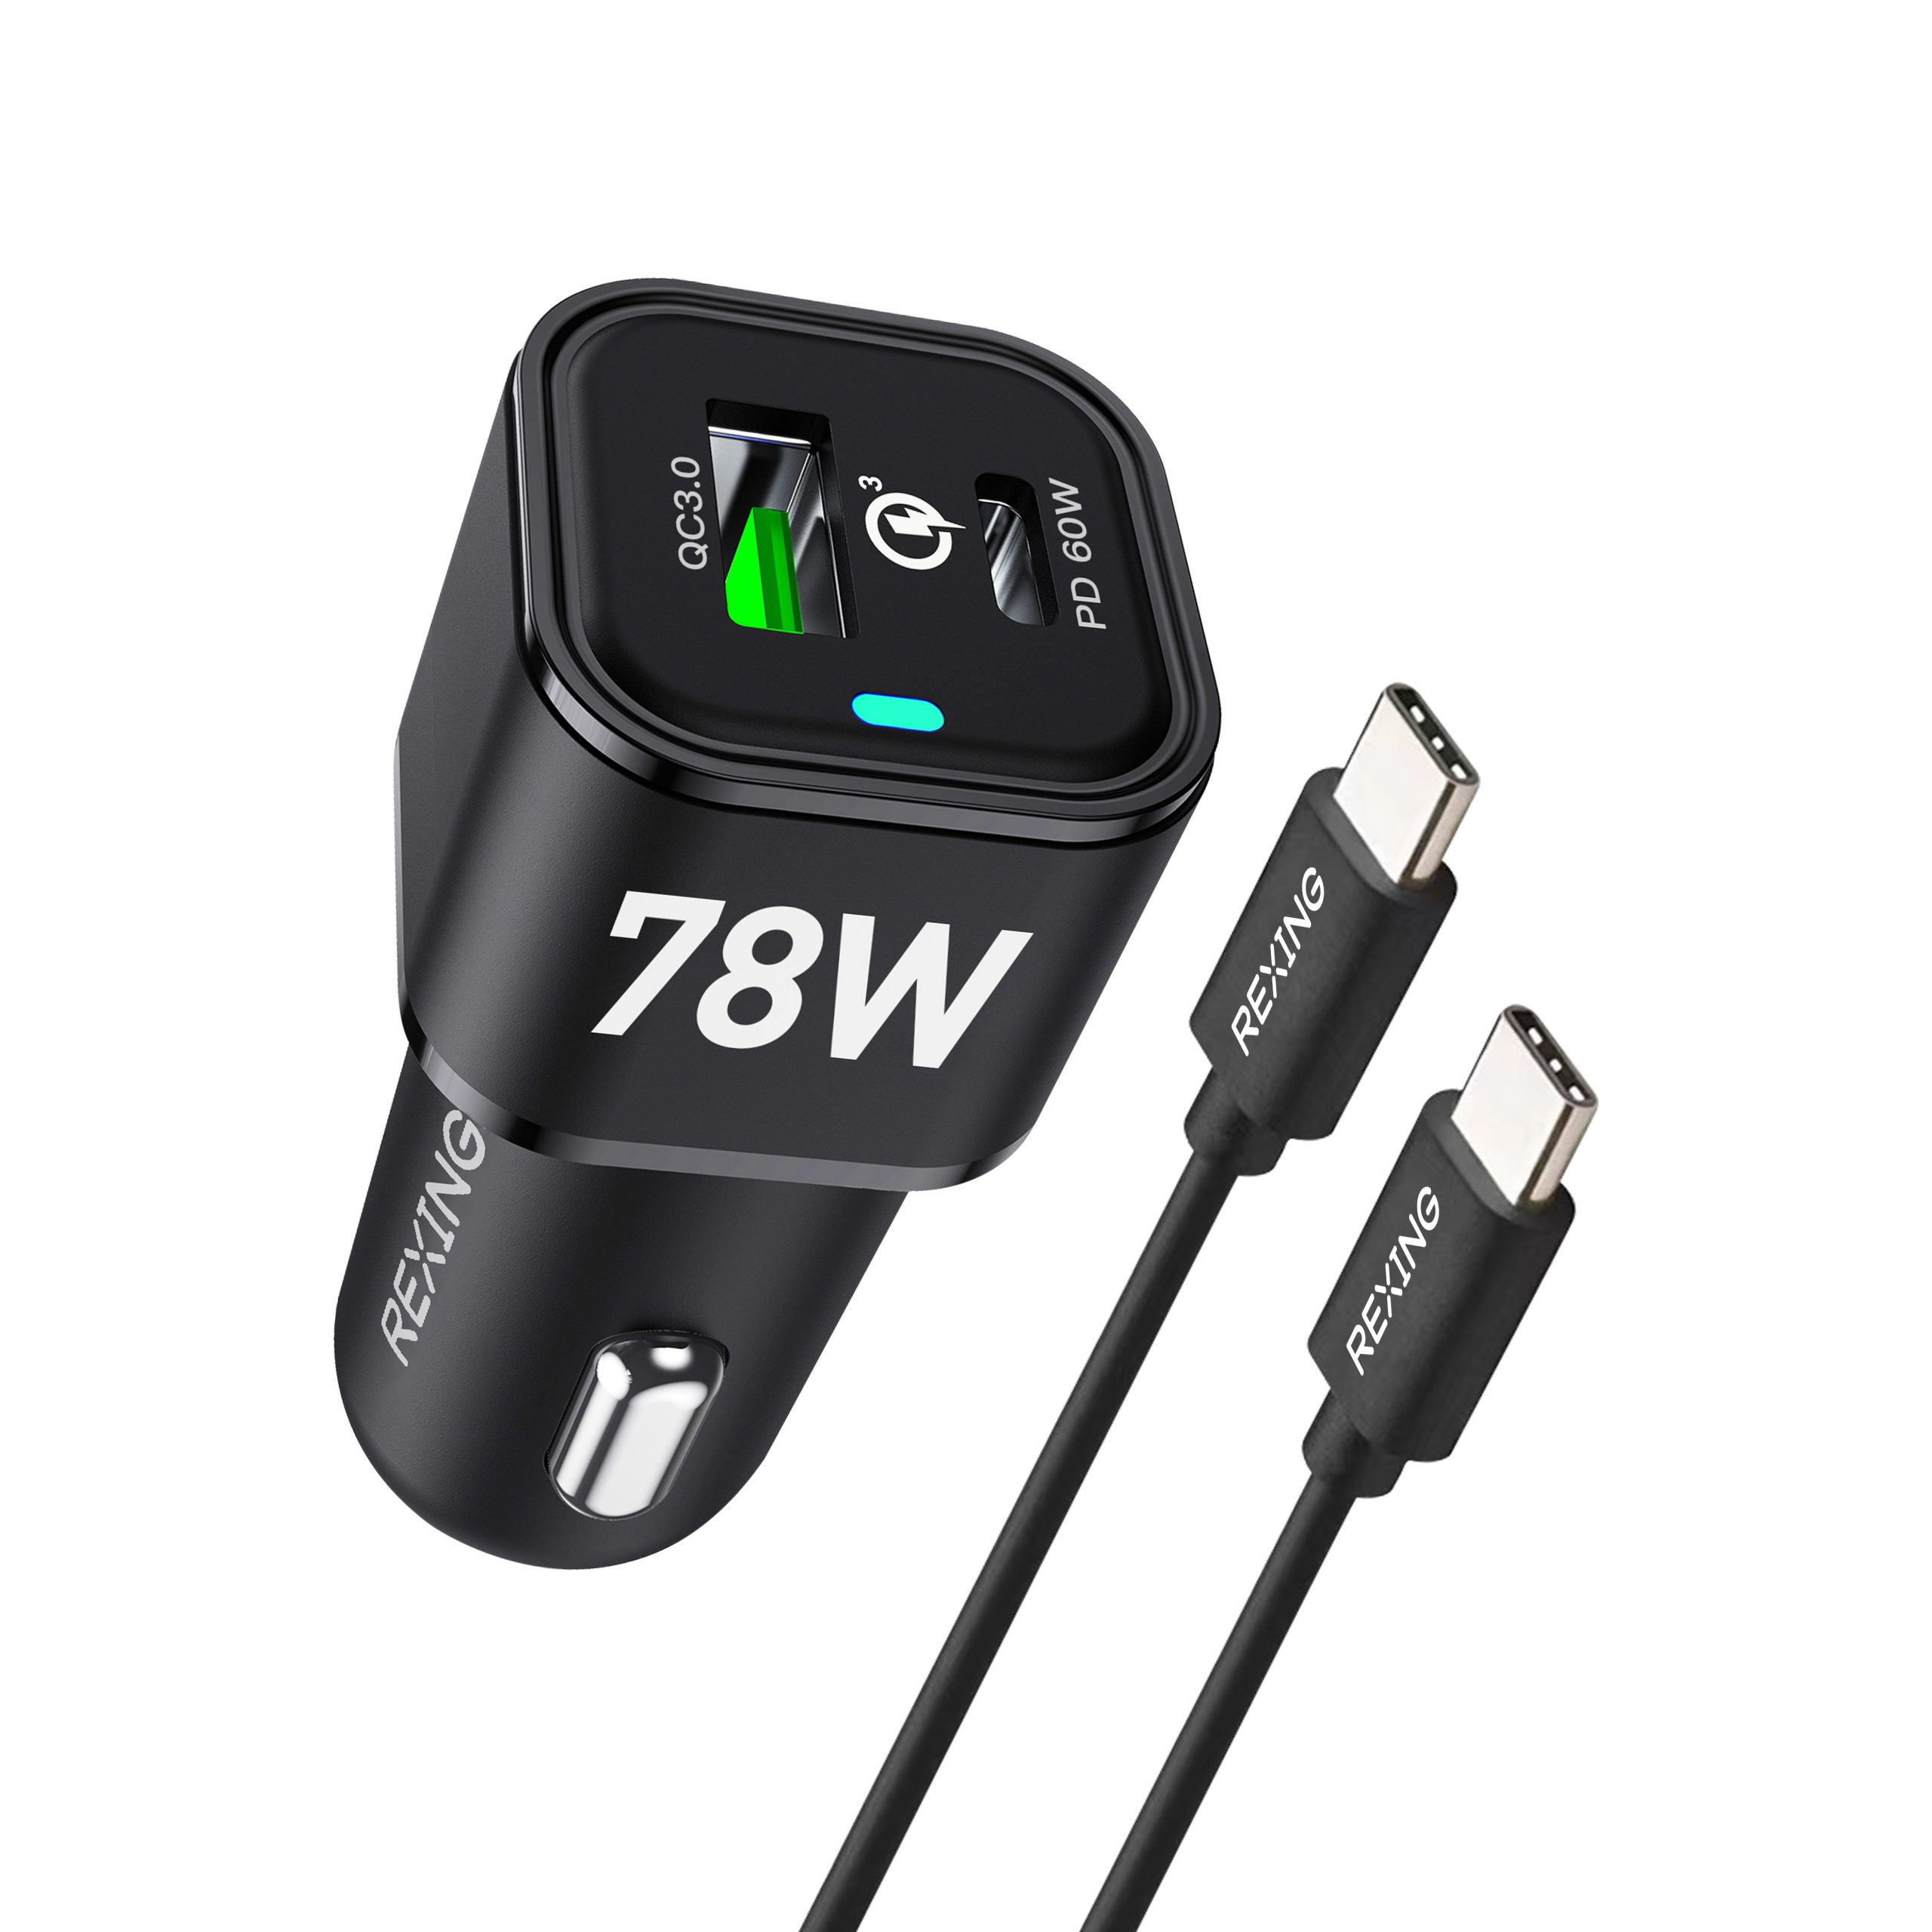 USB-C Vehicle Power Cable